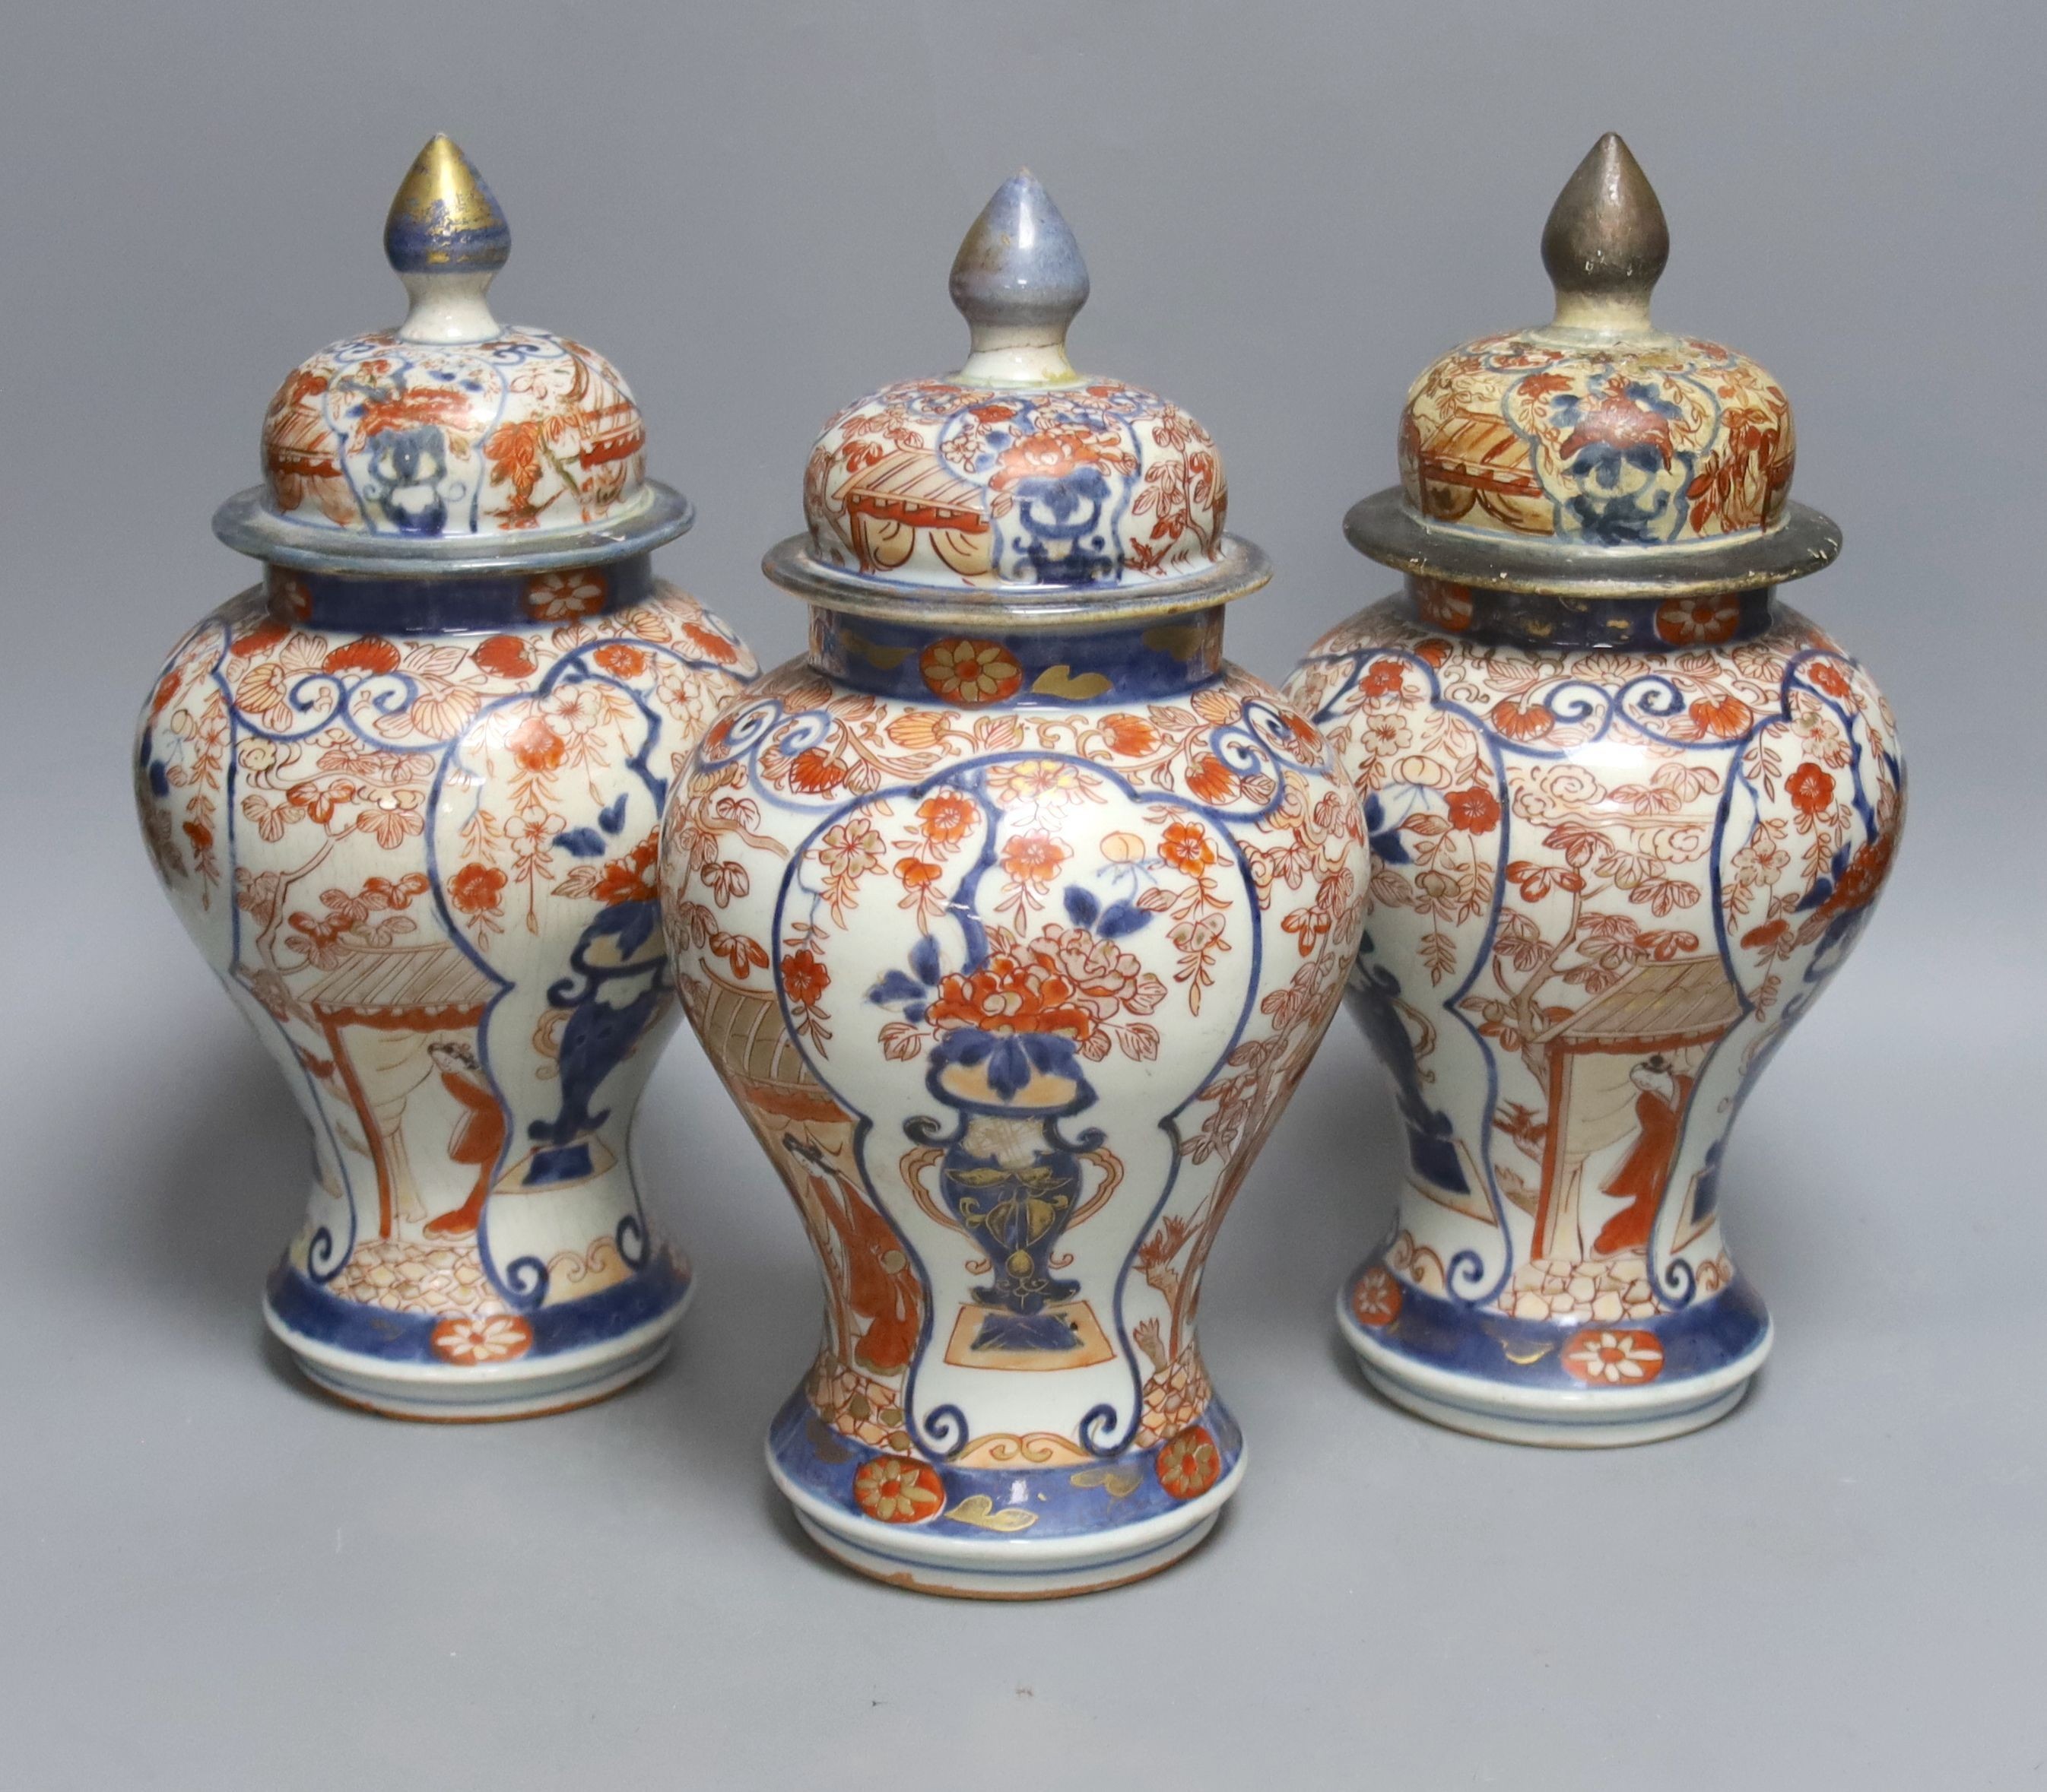 Three 18th century Japanese Arita baluster vases and covers decorated with flowers in urns (damage to covers) 29cm